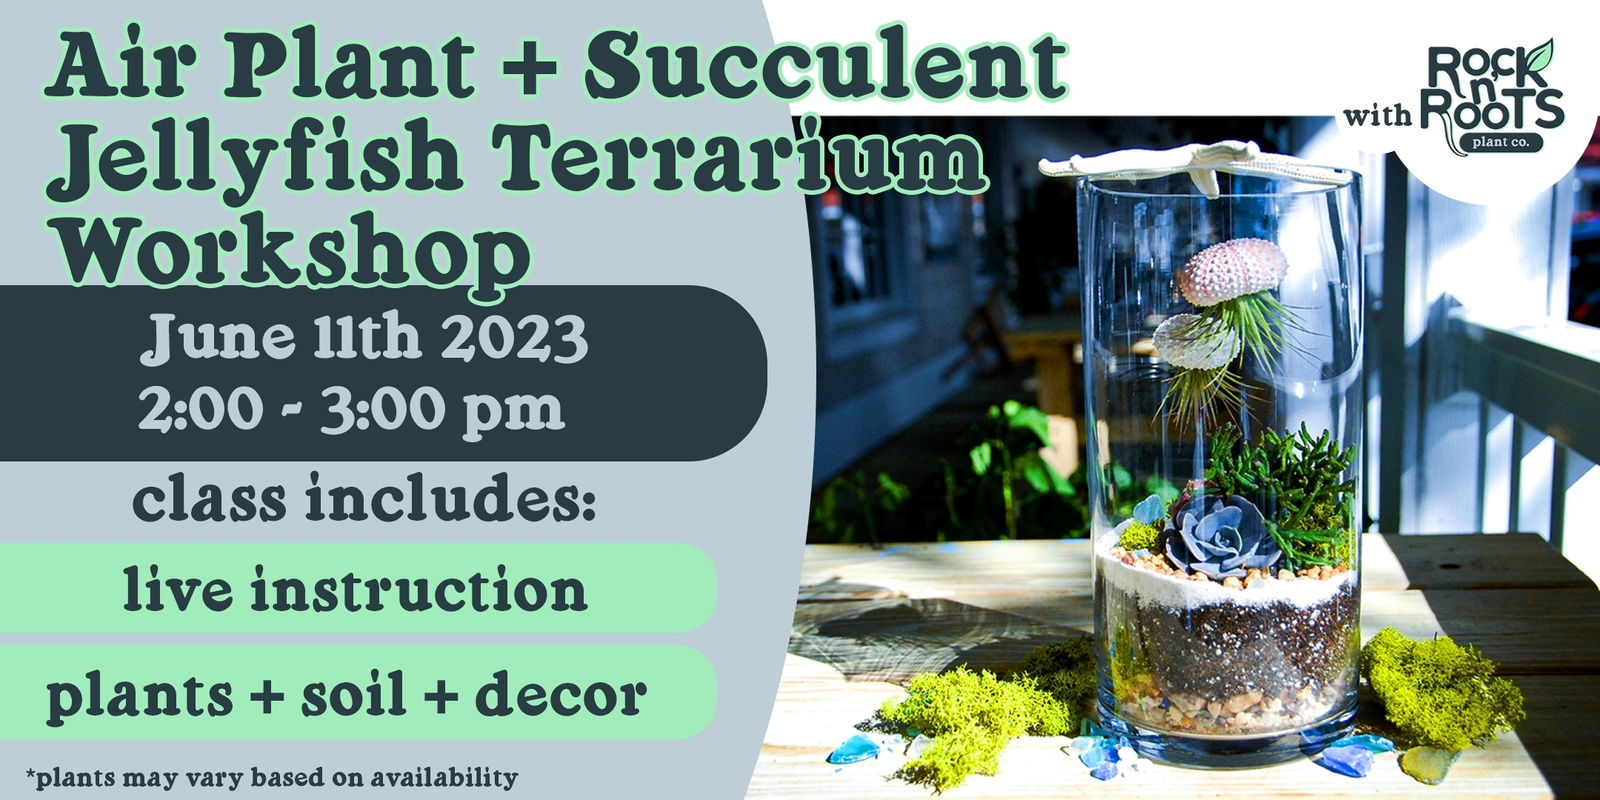 Banner image for Air Plant + Succulent Jellyfish Terrarium Workshop at Rock n' Roots Plant Co. (Pawleys Island, SC)